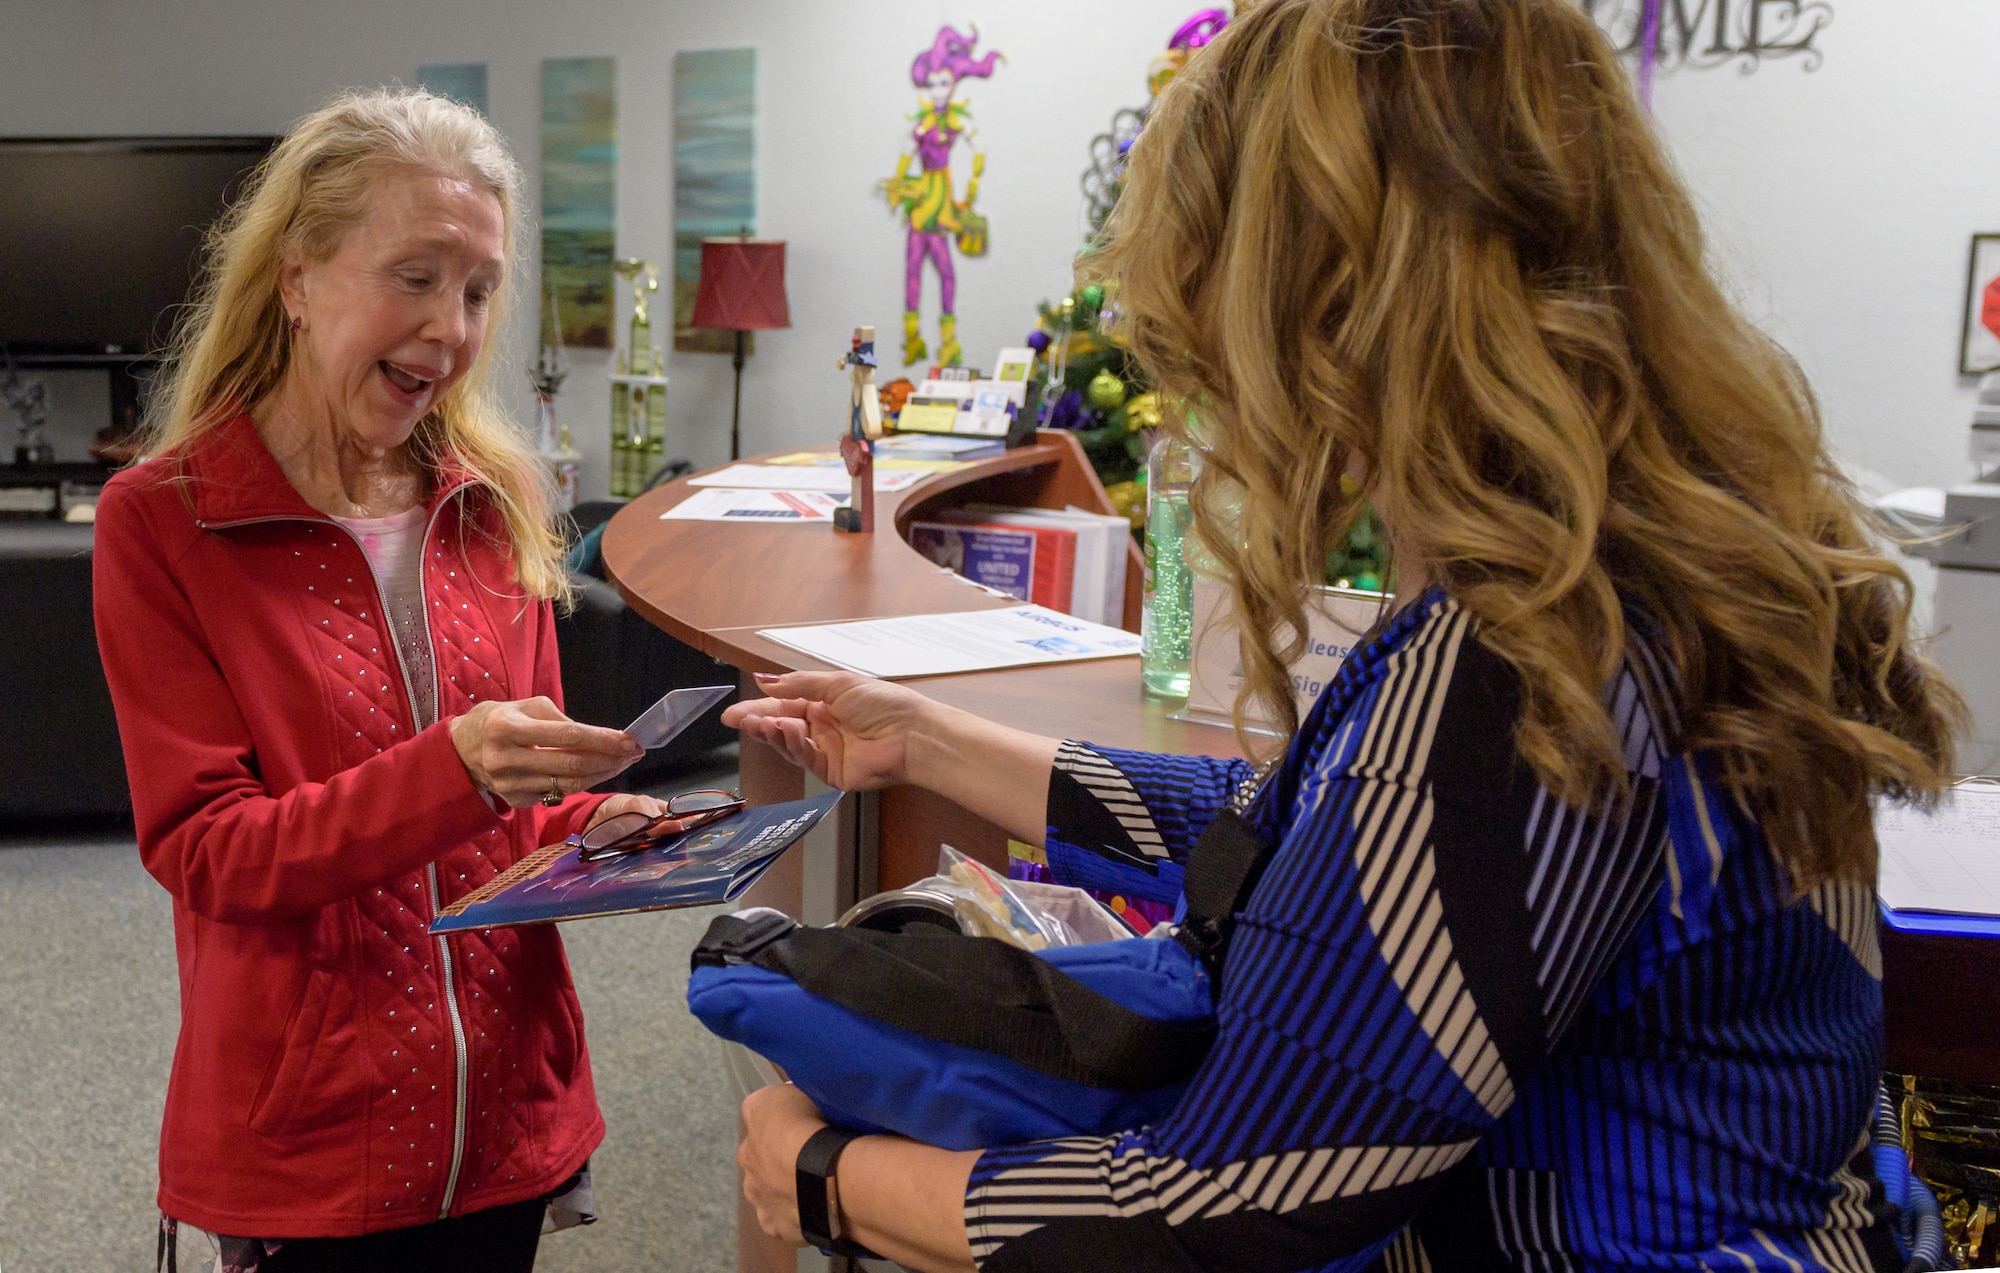 Holly Fisher, 81st Force Support Squadron Airman & Family Readiness Center community readiness specialist, presents Mary Buckley, daughter of U.S. Air Force Capt. Robert Gereer, with her Gold Star Family Member ID card inside the Sablich Center at Keesler Air Force Base, Mississippi, Feb. 15, 2019. Gereer served during the Korean War and was placed in a missing in action (MIA) status due to his remains not being found. As a surviving daughter of an MIA service member, Buckley is allowed to obtain an ID card for recognition and installation access so that she can attend events and access A&FRC referral services. (U.S. Air Force photo by Andre' Askew)